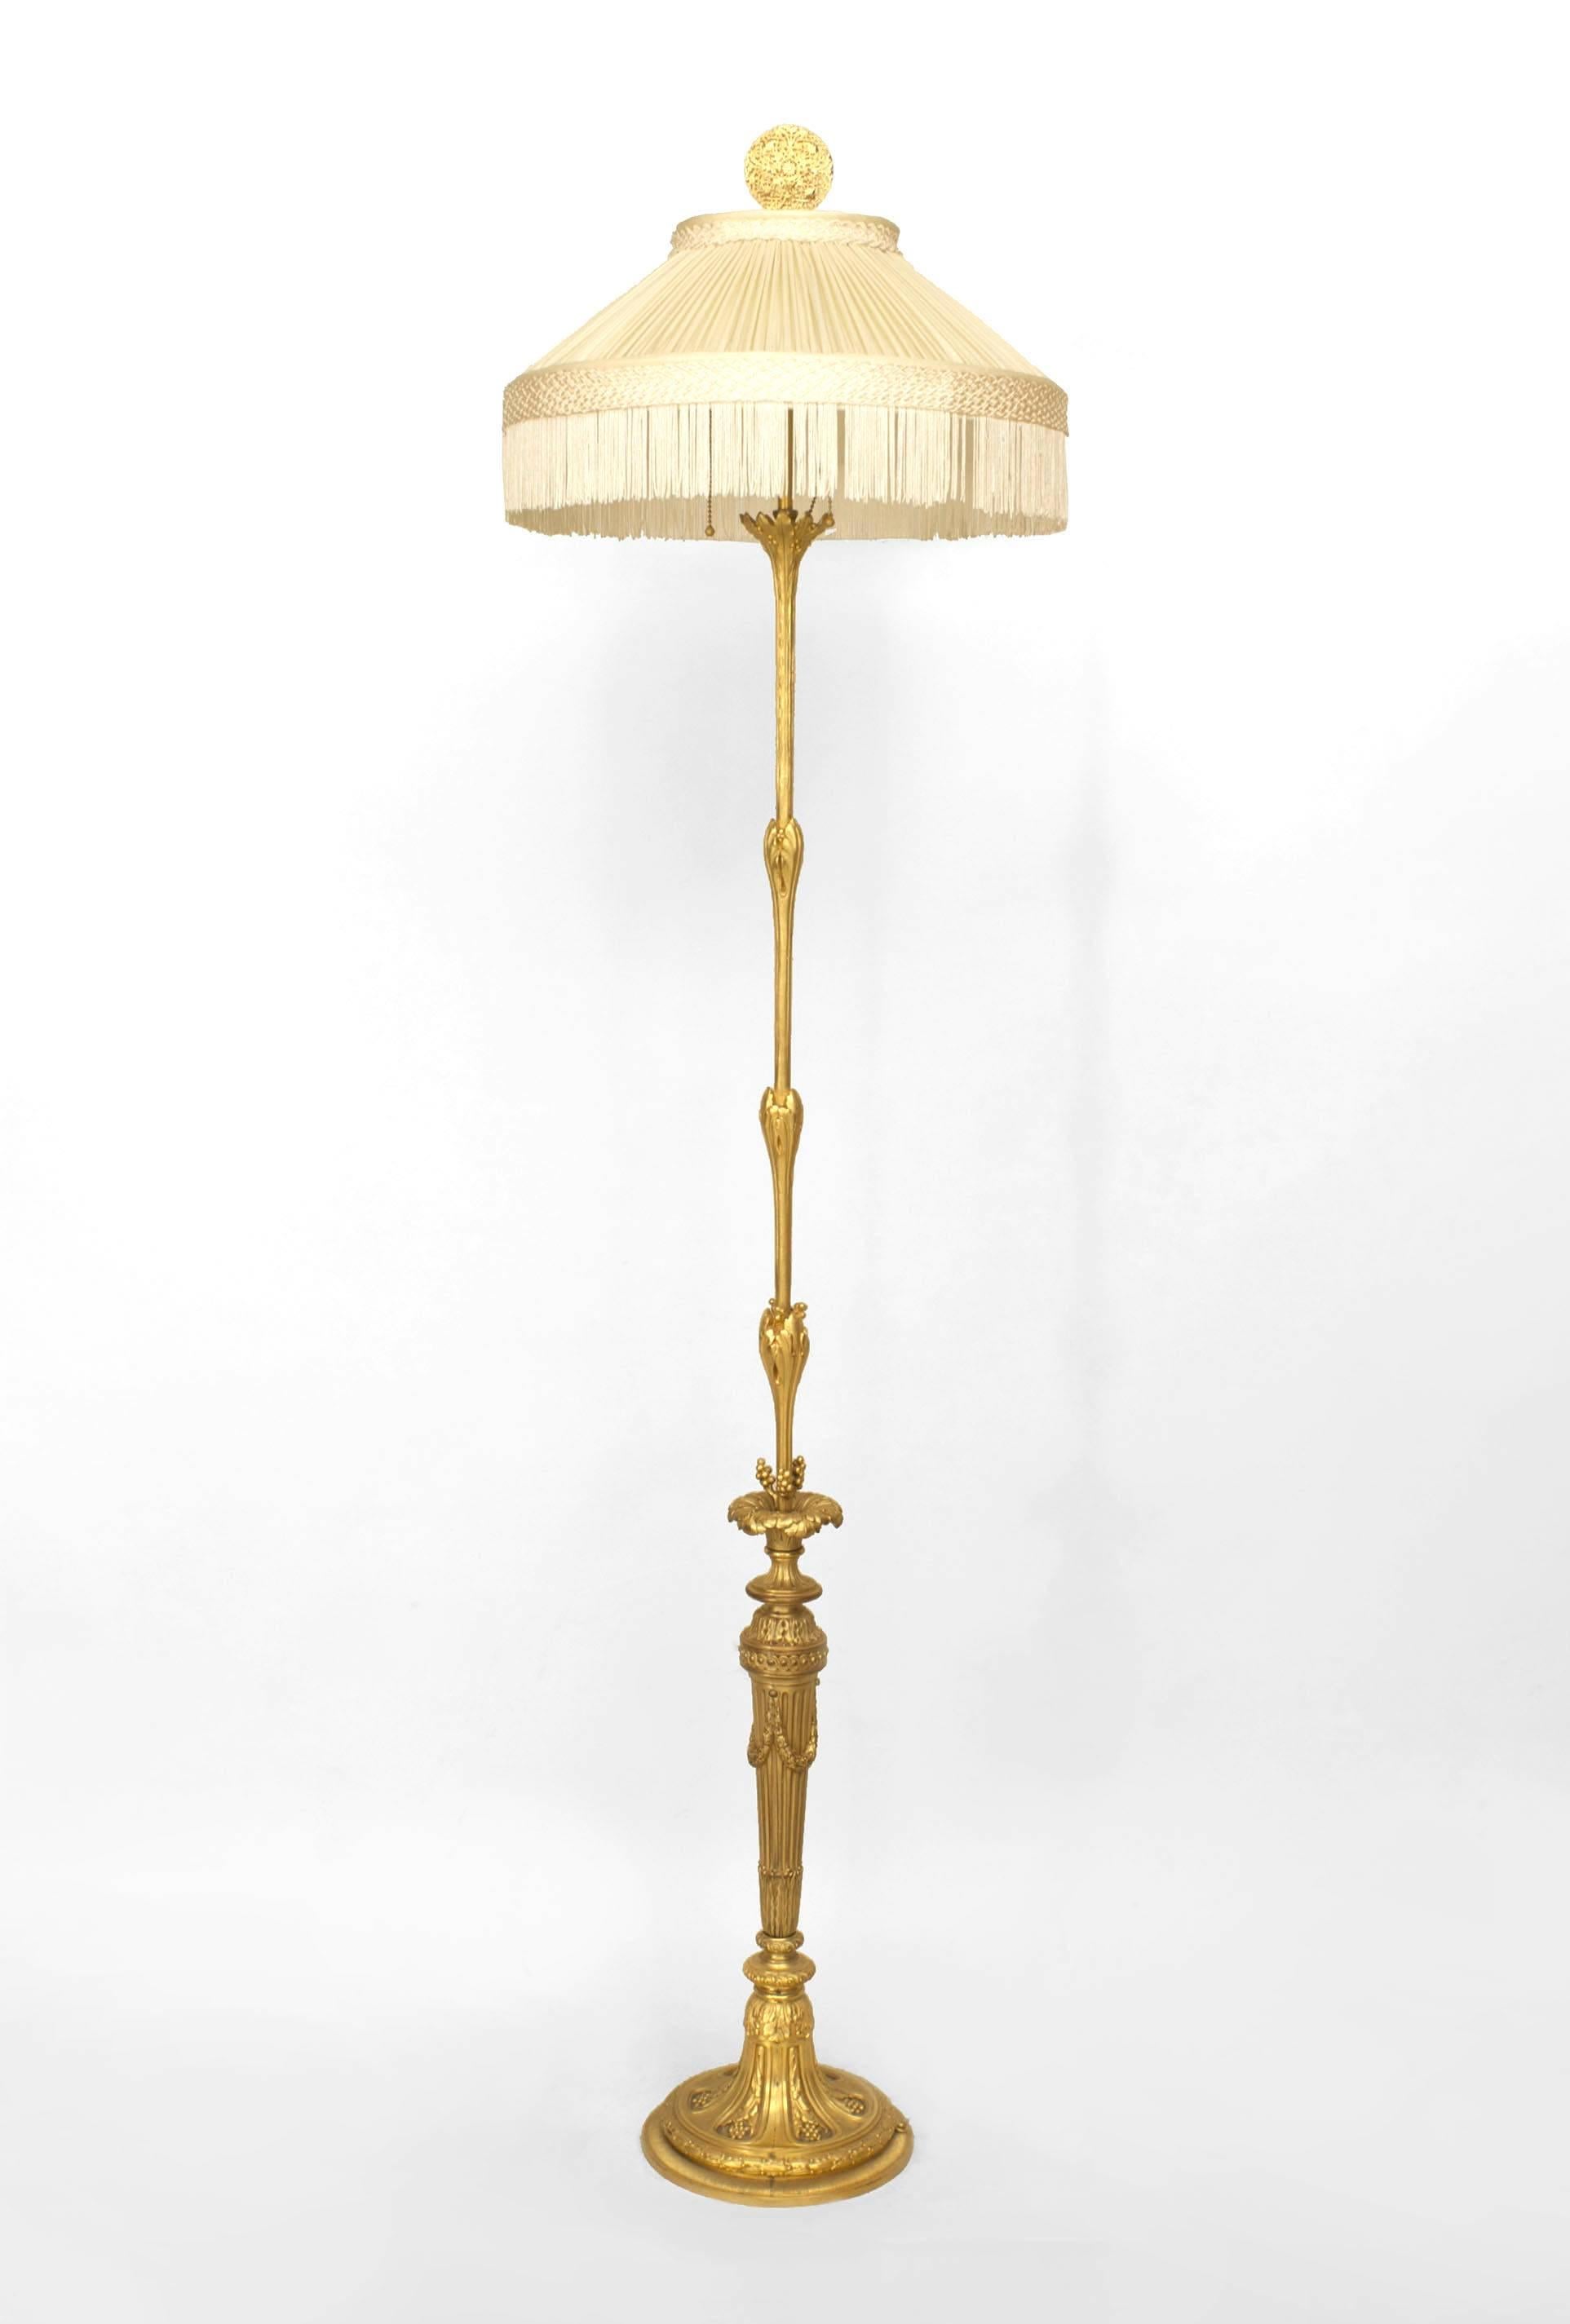 French Louis XVI-style (20th Century) gilt bronze floor lamp supported on a round base with a floral design shaft.
